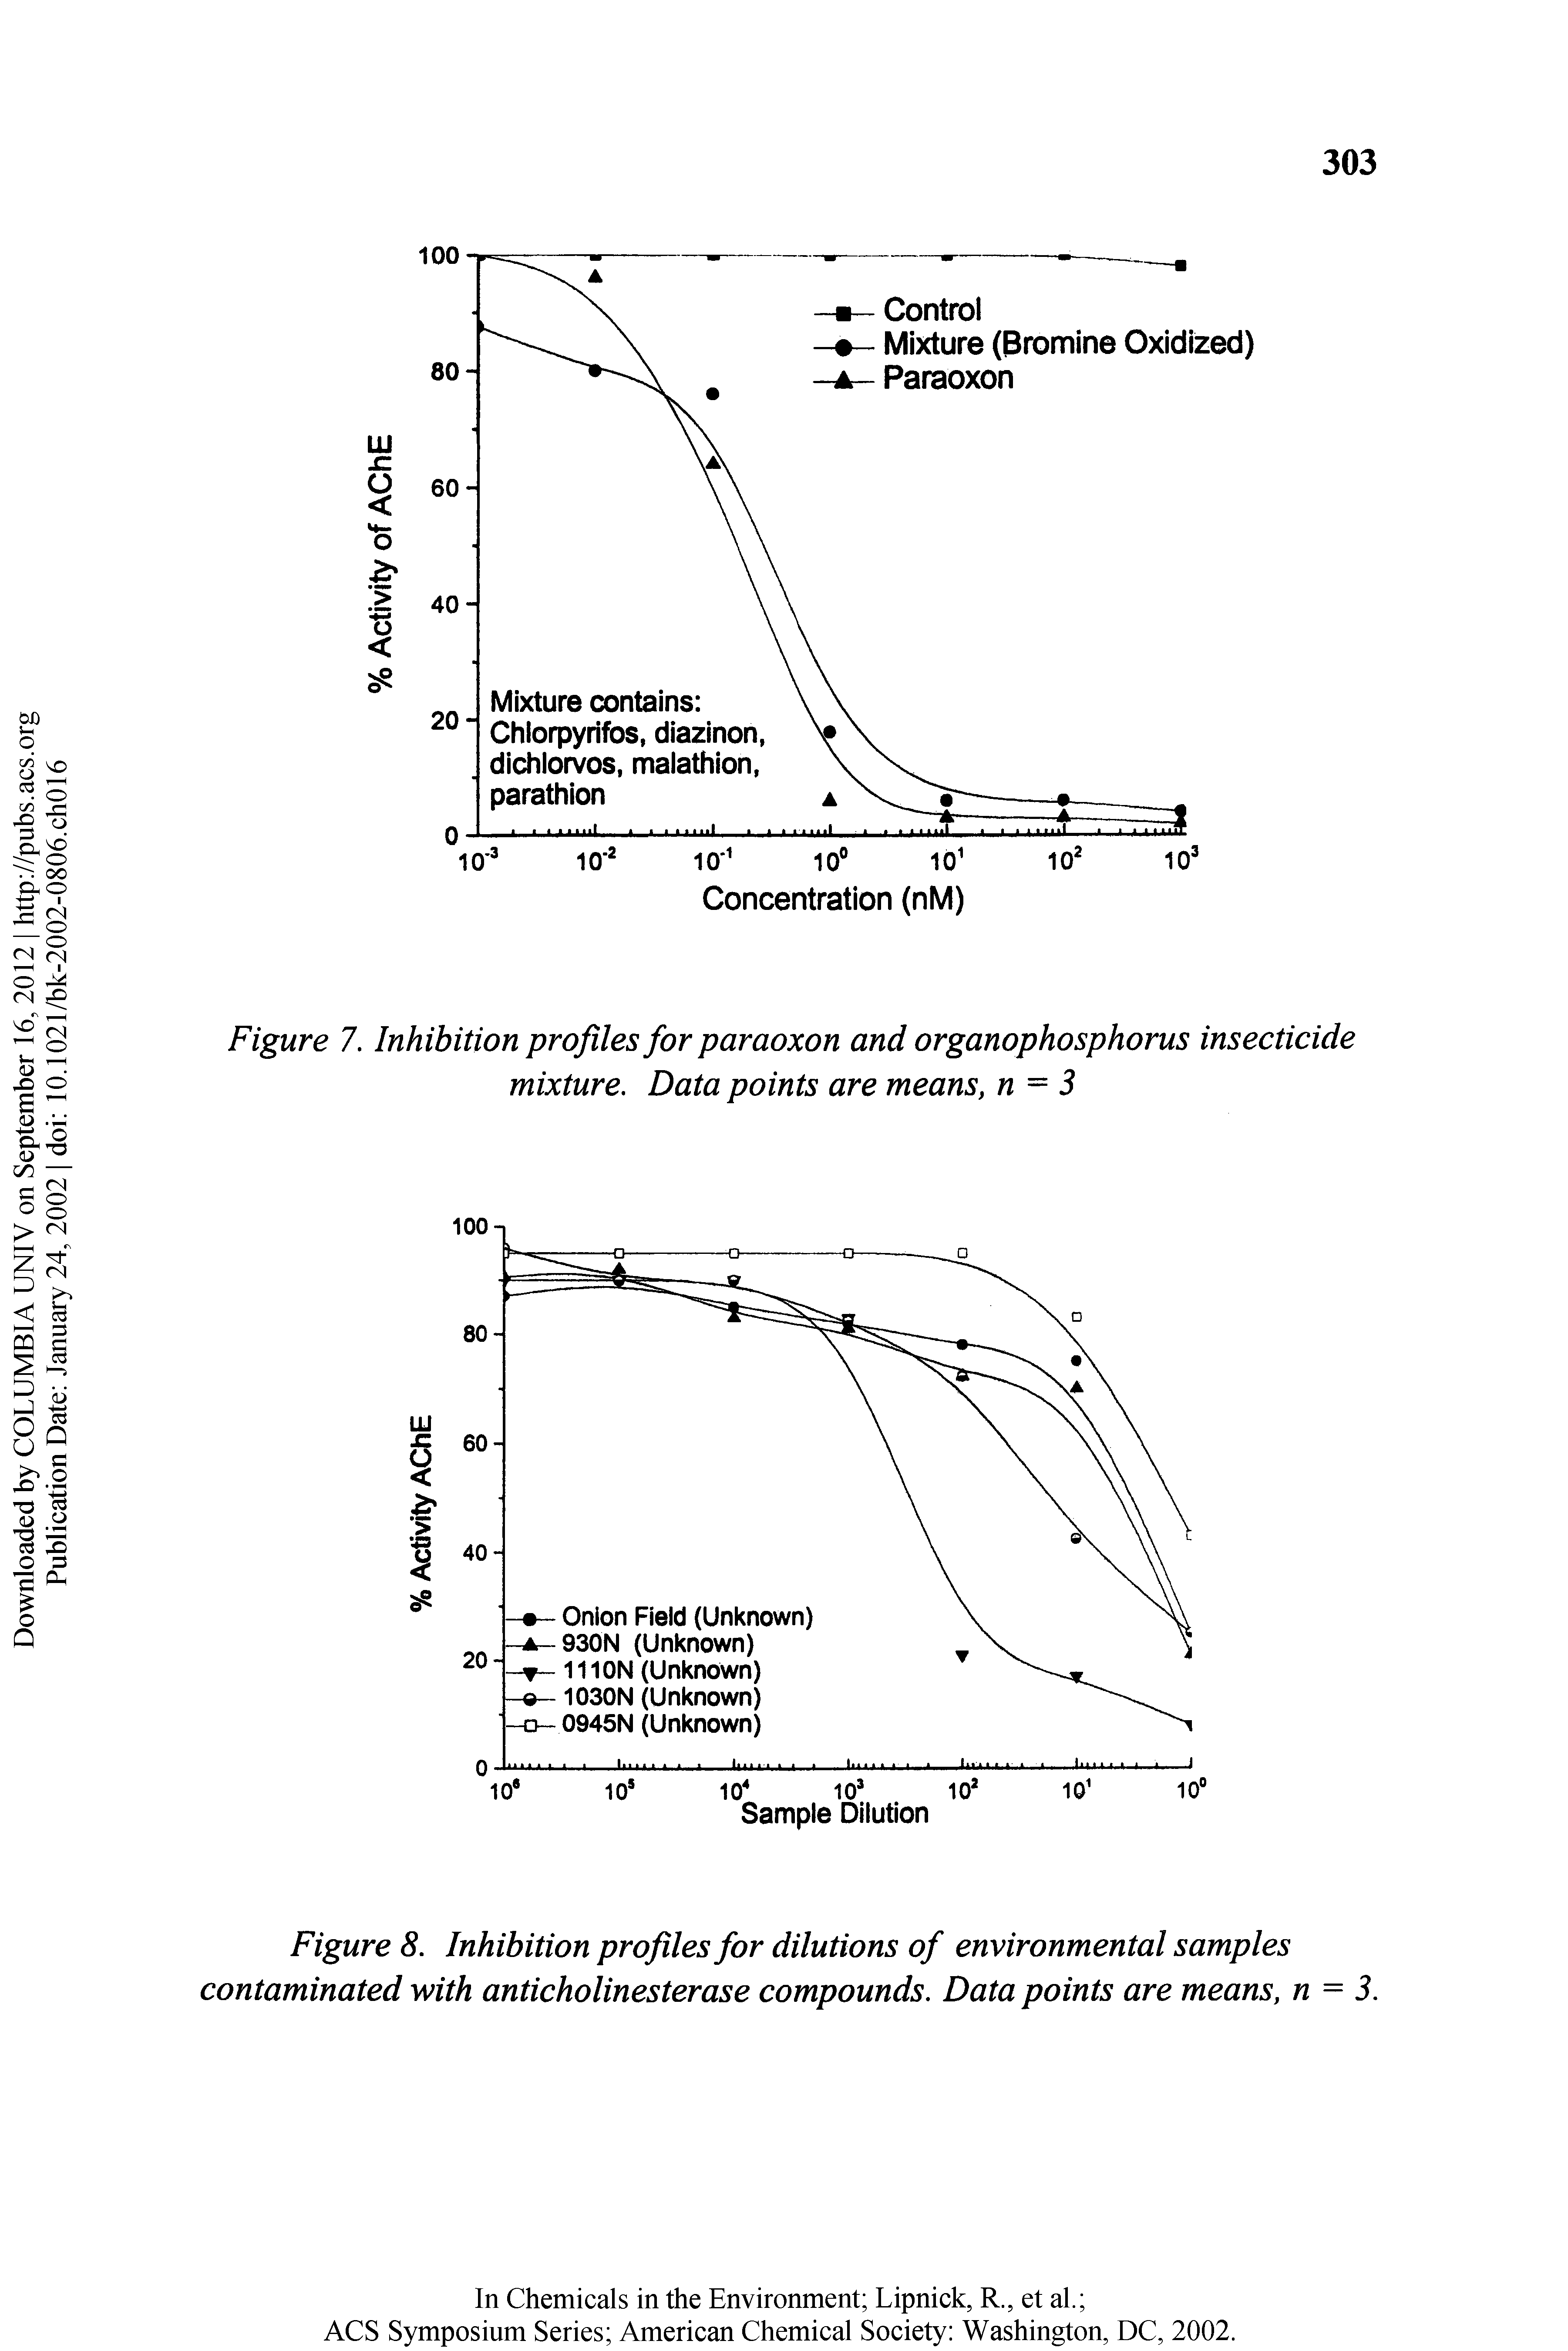 Figure 7. Inhibition profiles for paraoxon and organophosphorus insecticide mixture. Data points are means, n = 3...